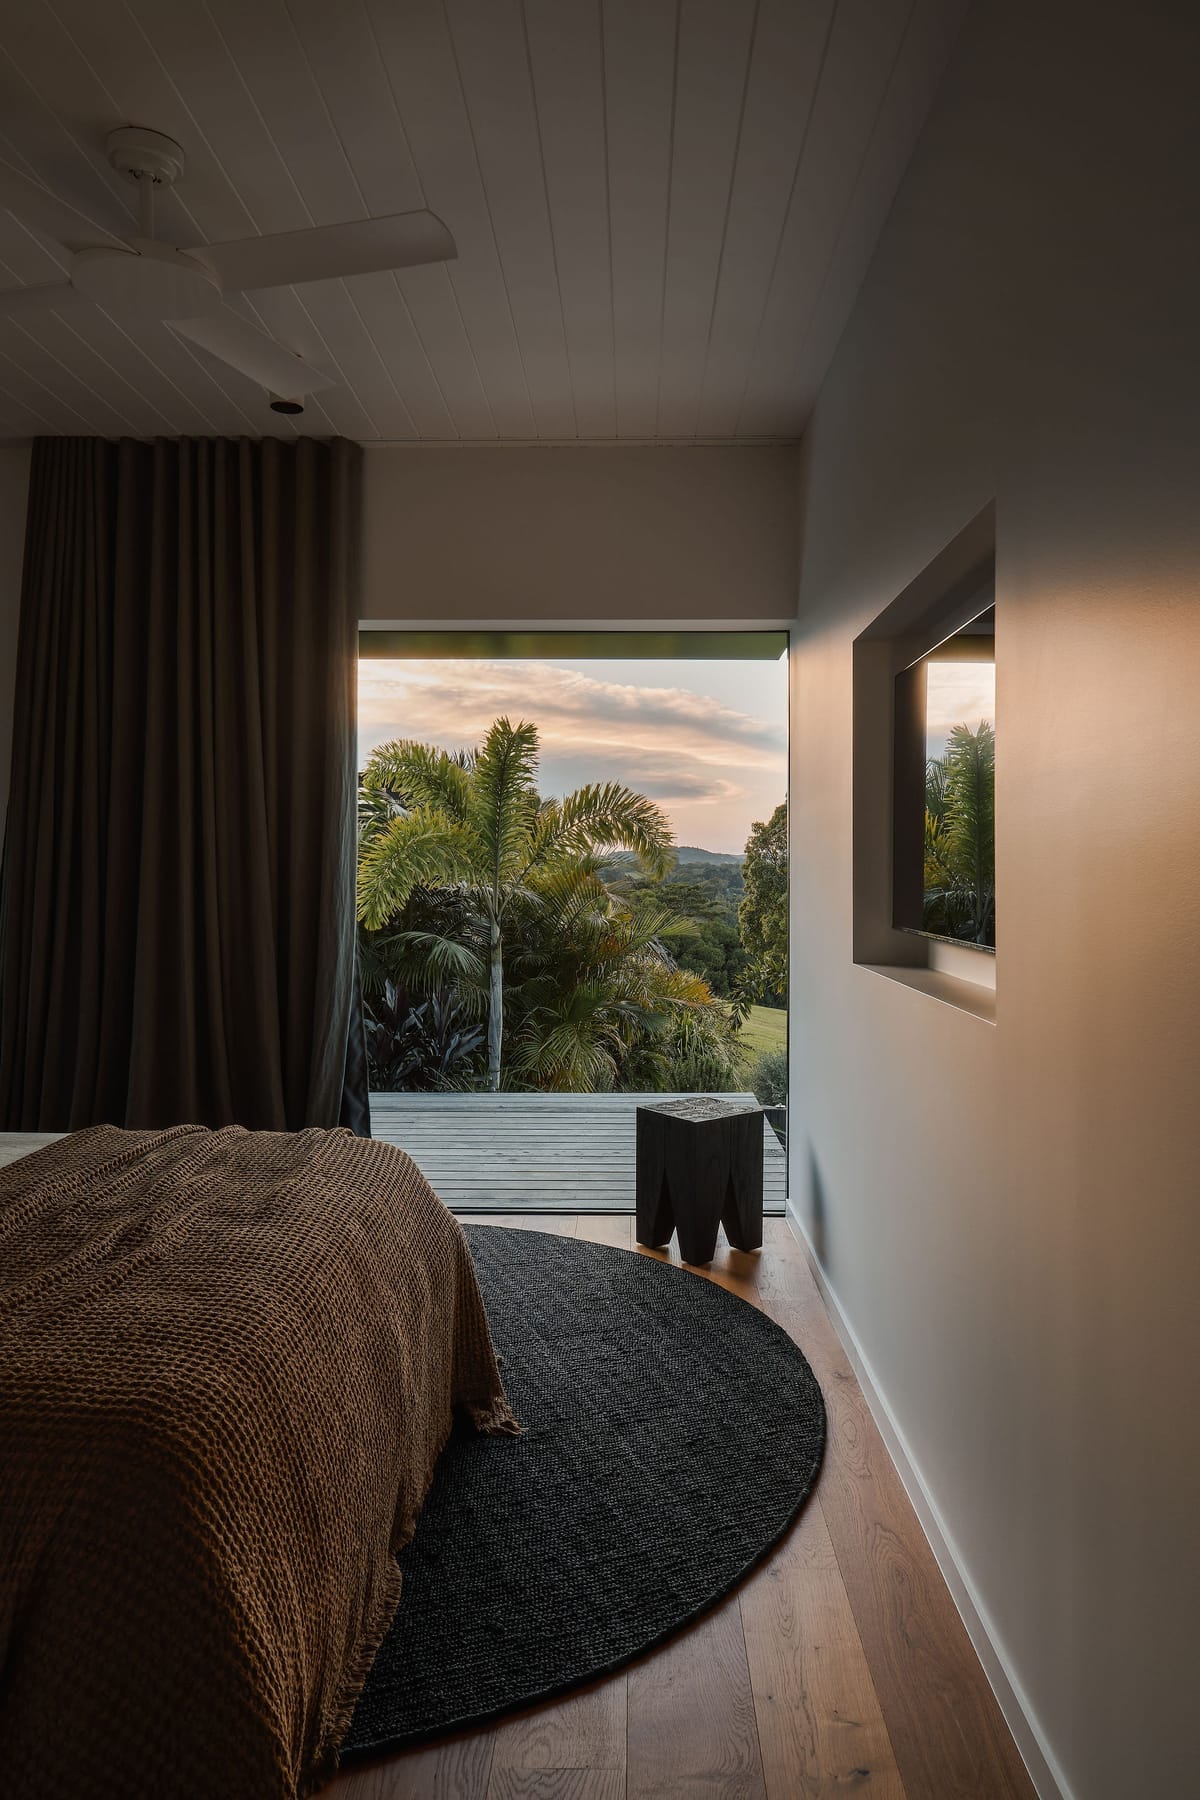 Rockpool Farm Byron Bay. Photography by Andy Macpherson. Bedroom window overlooking hills at sunset.